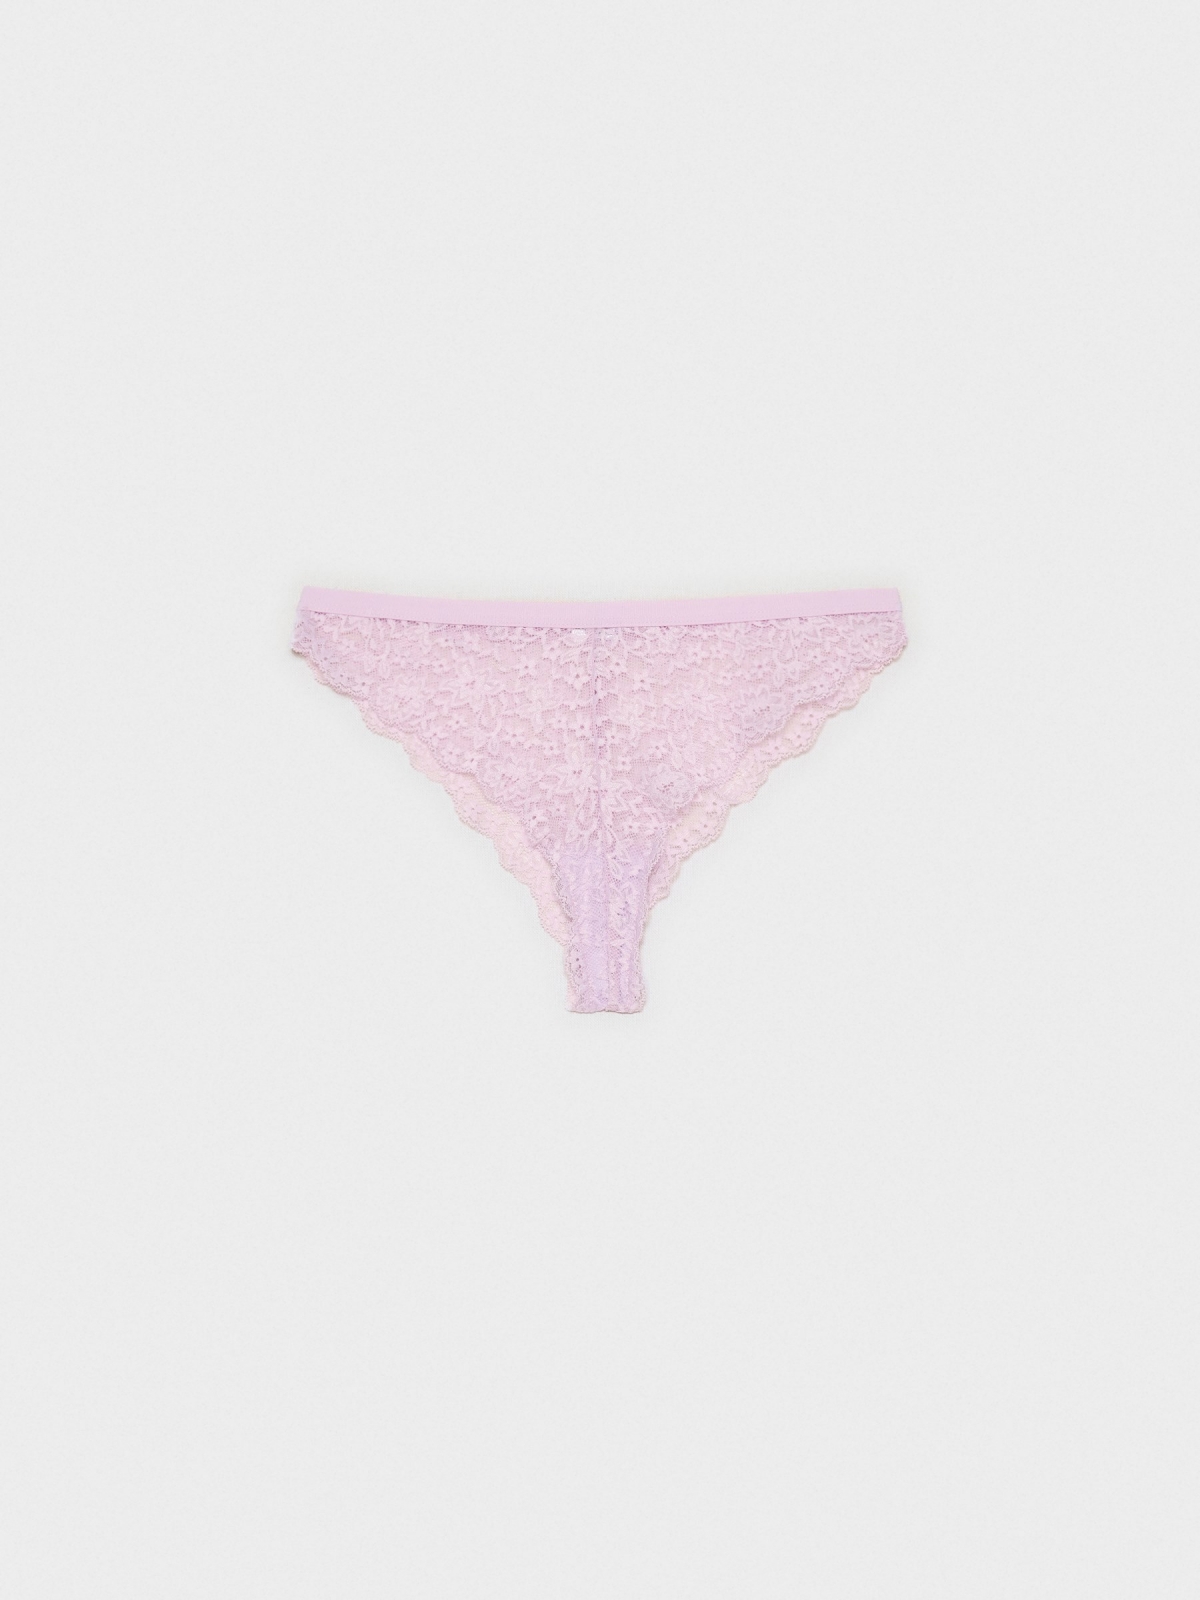 Brazilian knickers pink lace mauve middle back view